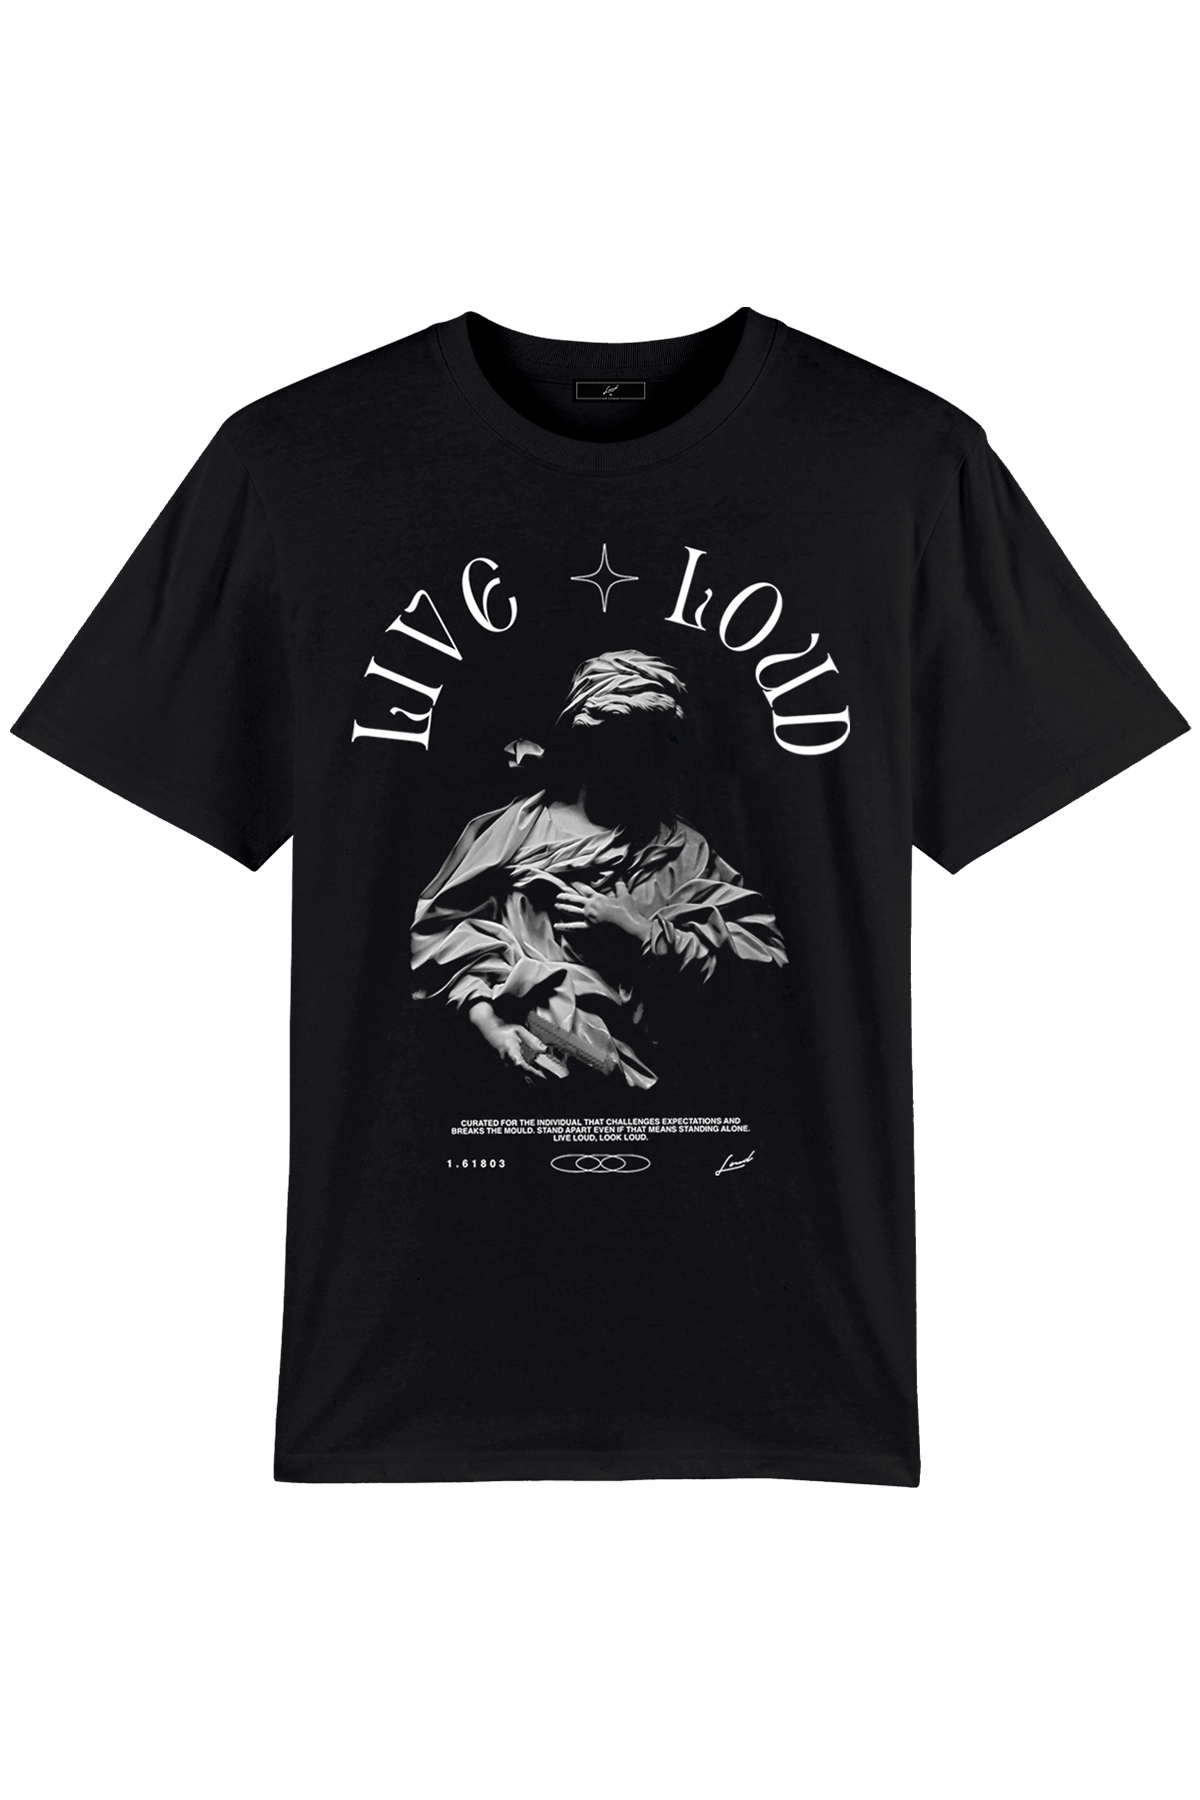 Conceal The Darkness T-Shirt Black - Live Look Loud